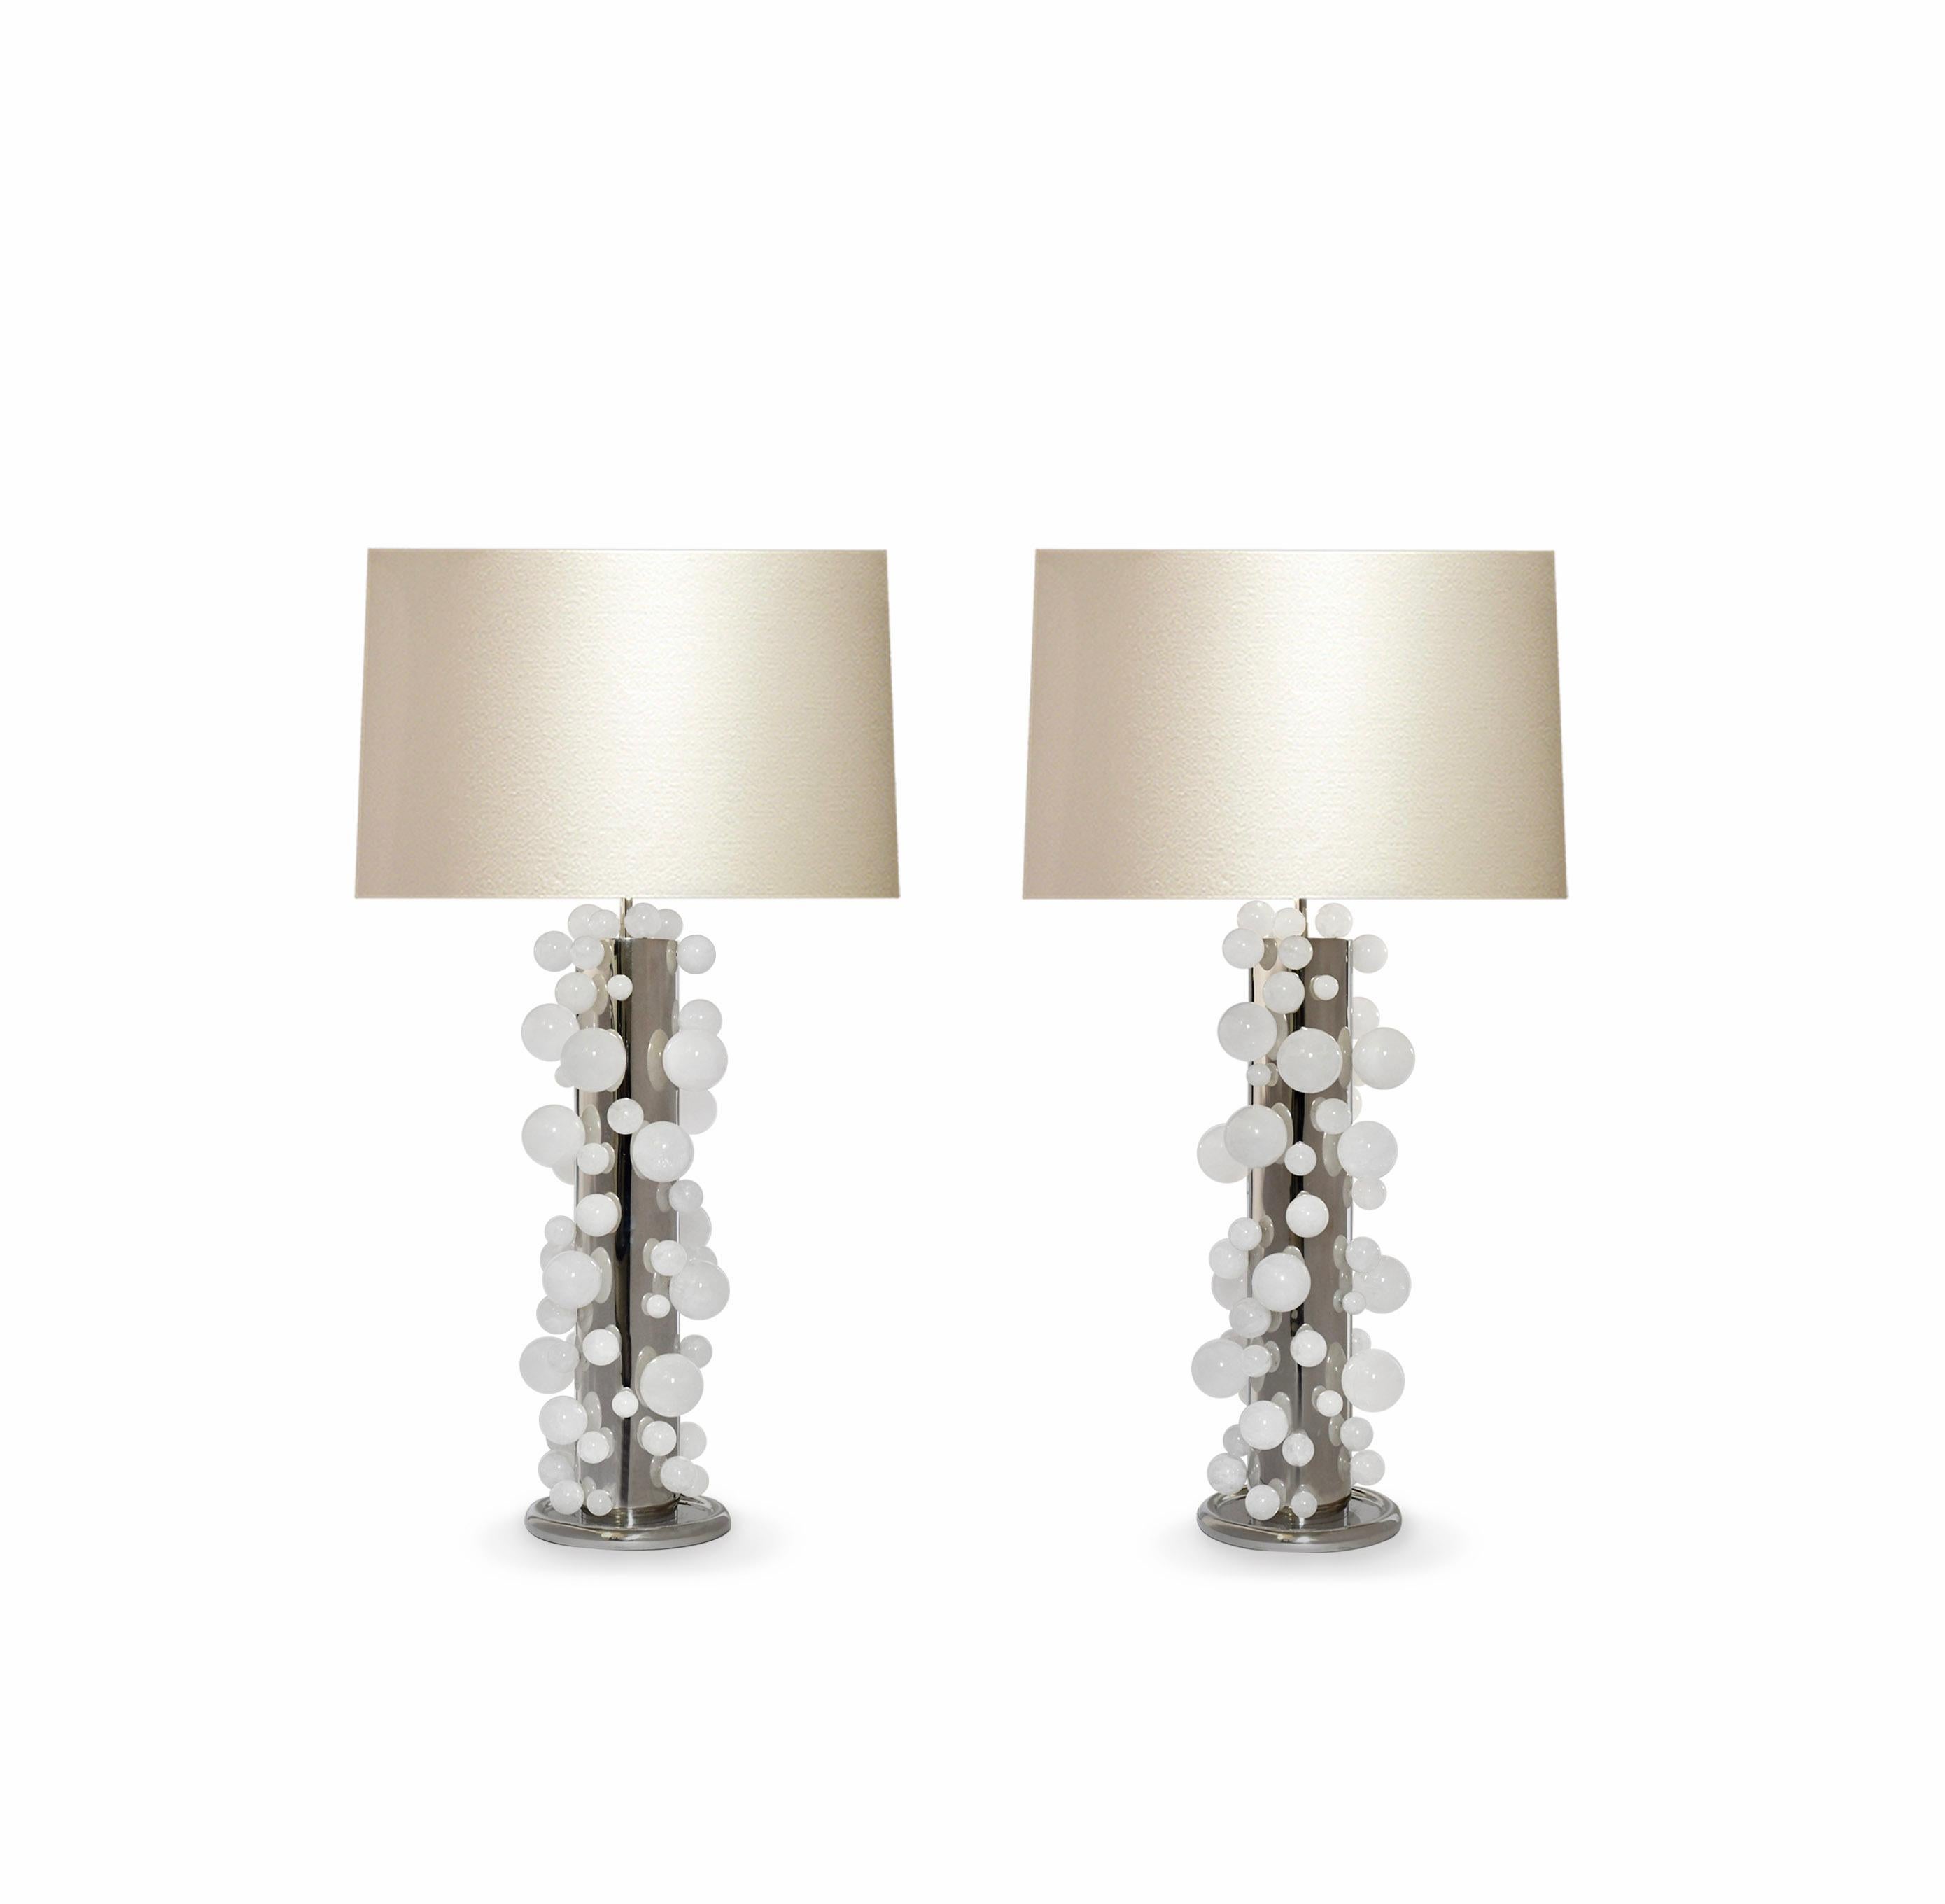 A tall pair of luxury rock crystal quartz bubble lamps with polished nickel frames. Created by Phoenix Gallery, NYC.
Each lamp installed two sockets.
To the top of the rock crystal 25.75